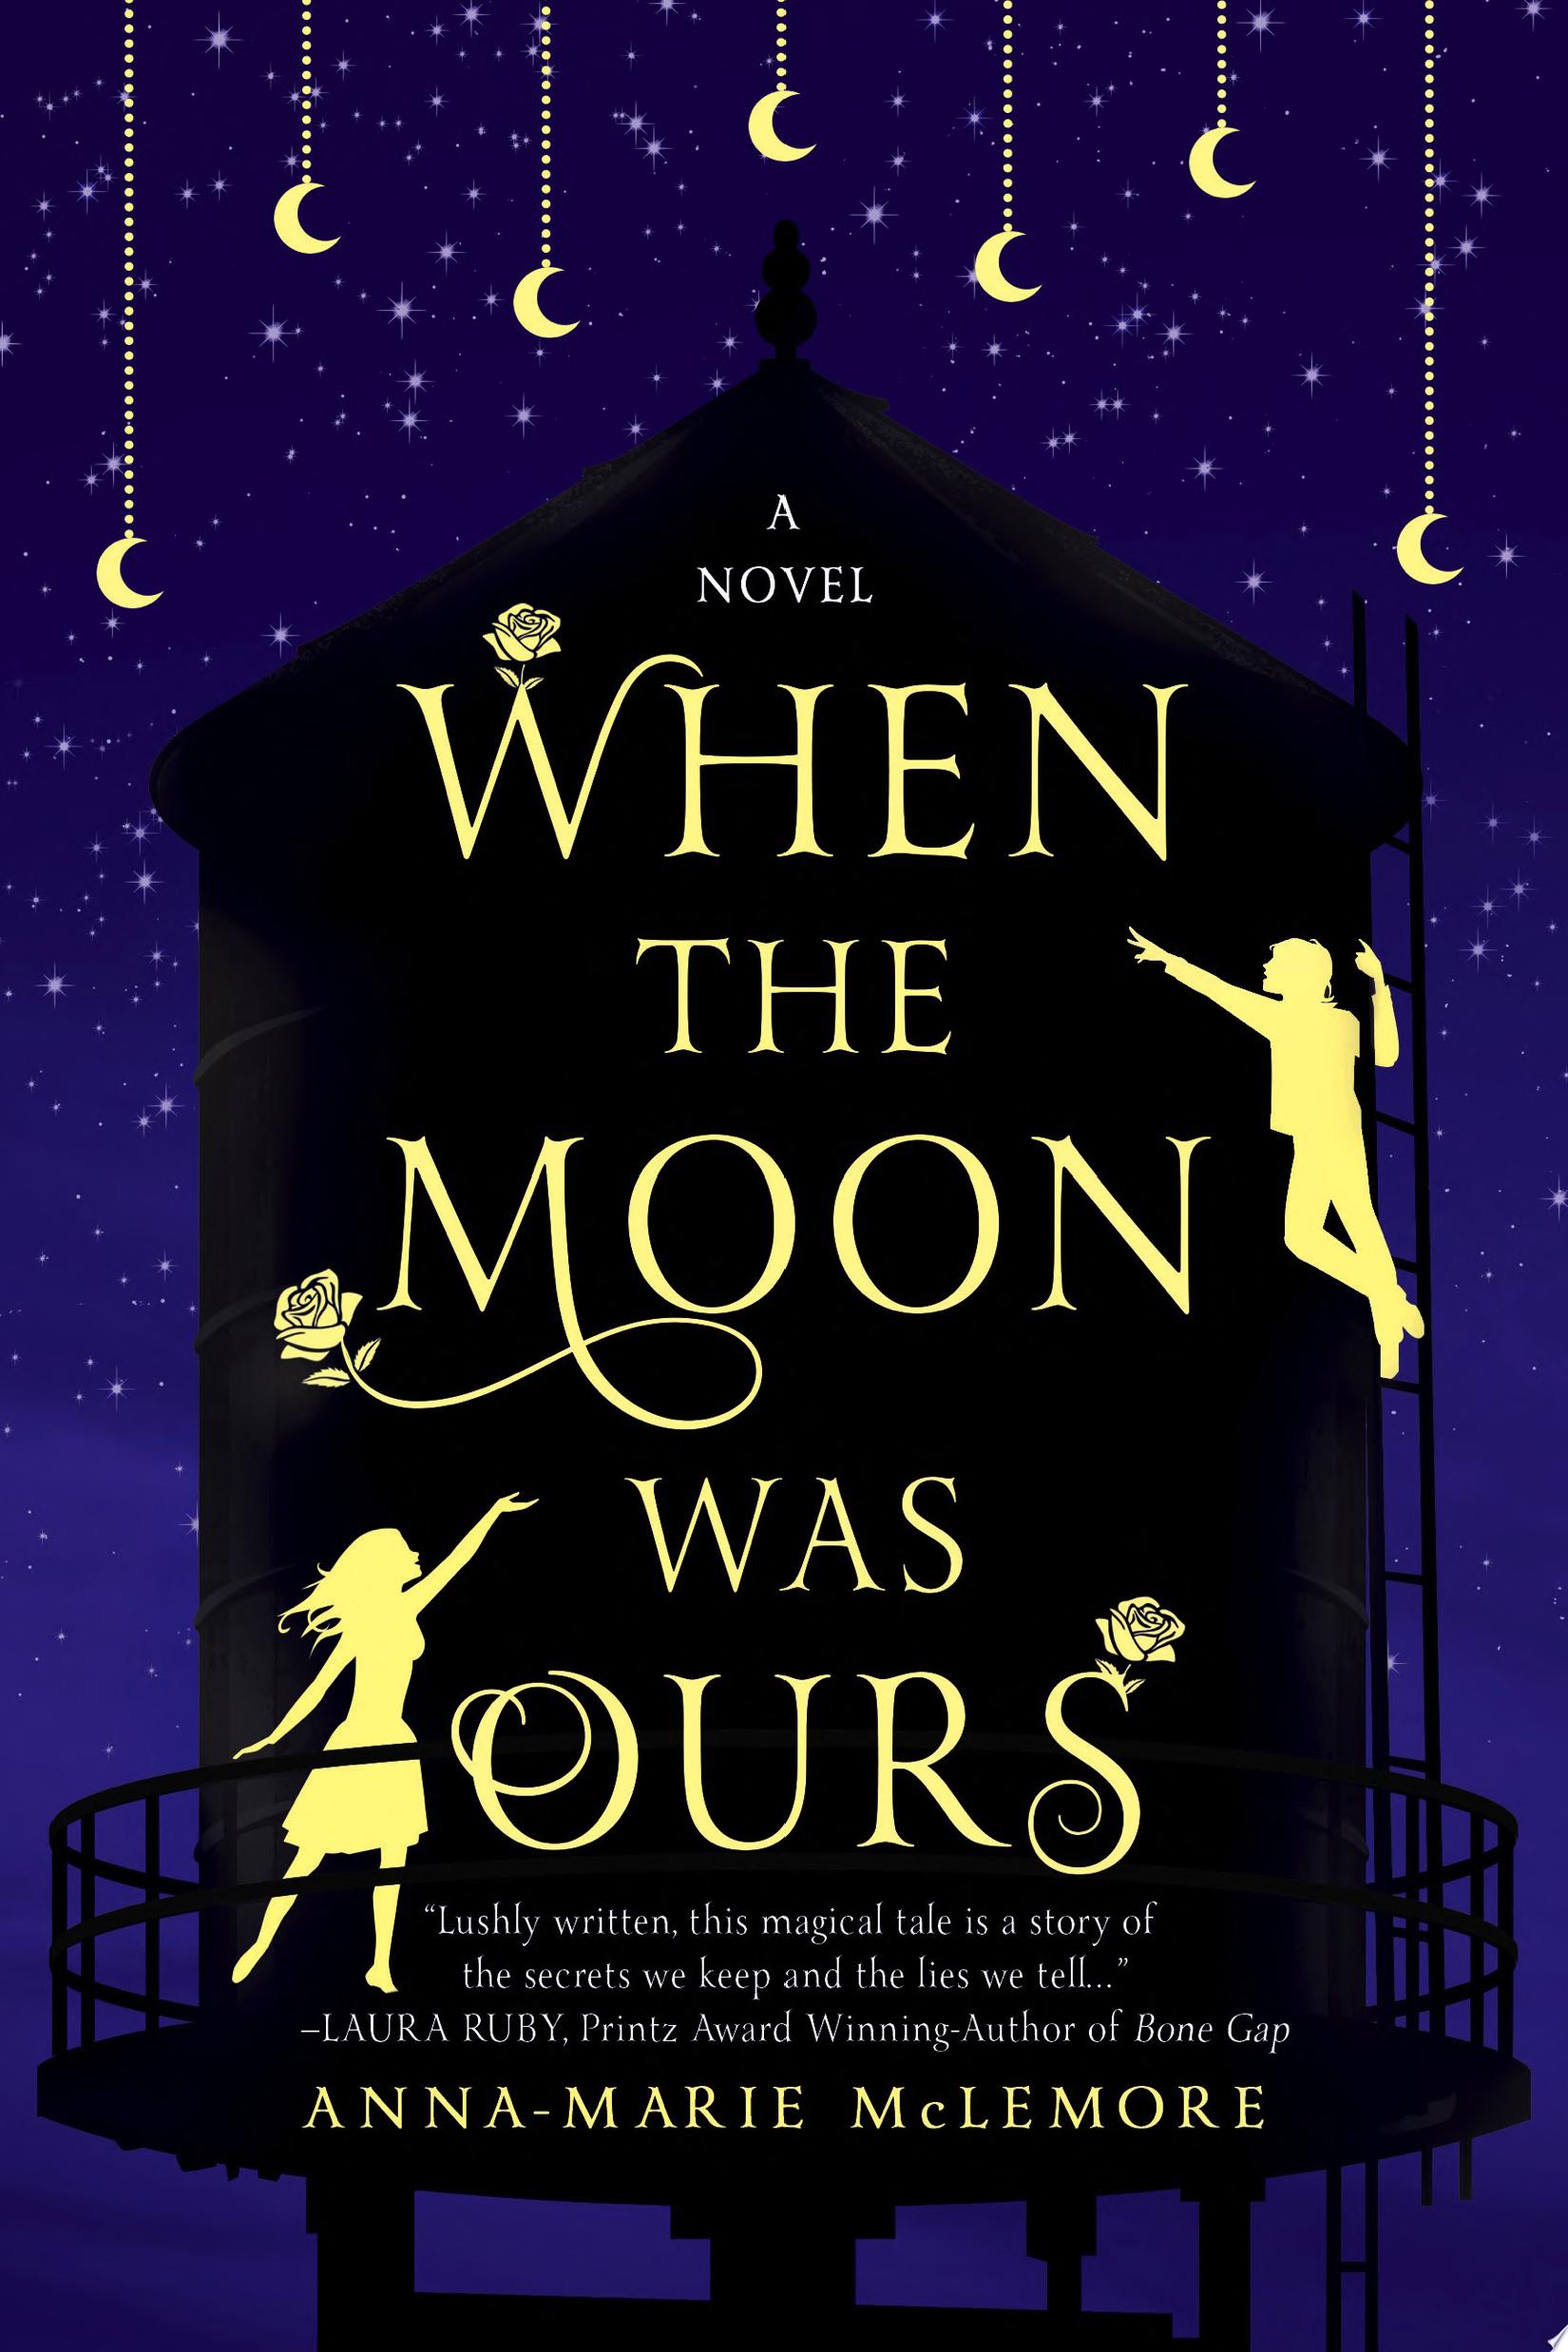 Image for "When the Moon Was Ours"